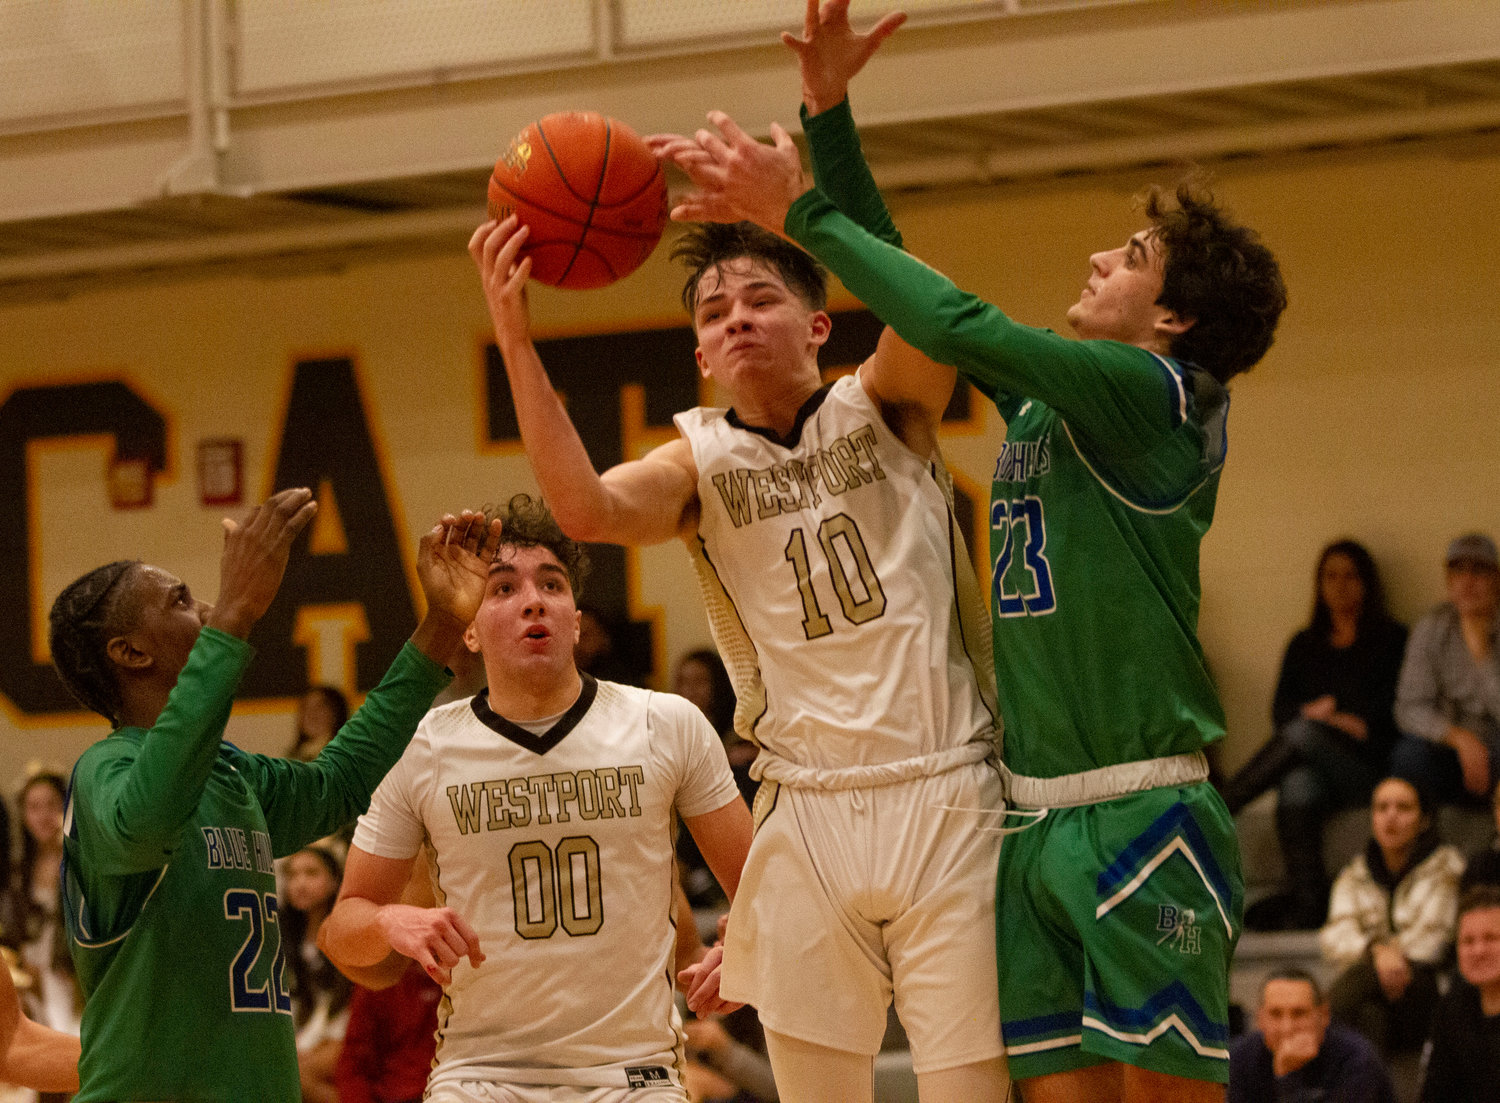 Max Morotti (left) looks on as Cam Leary comes down with a rebound.